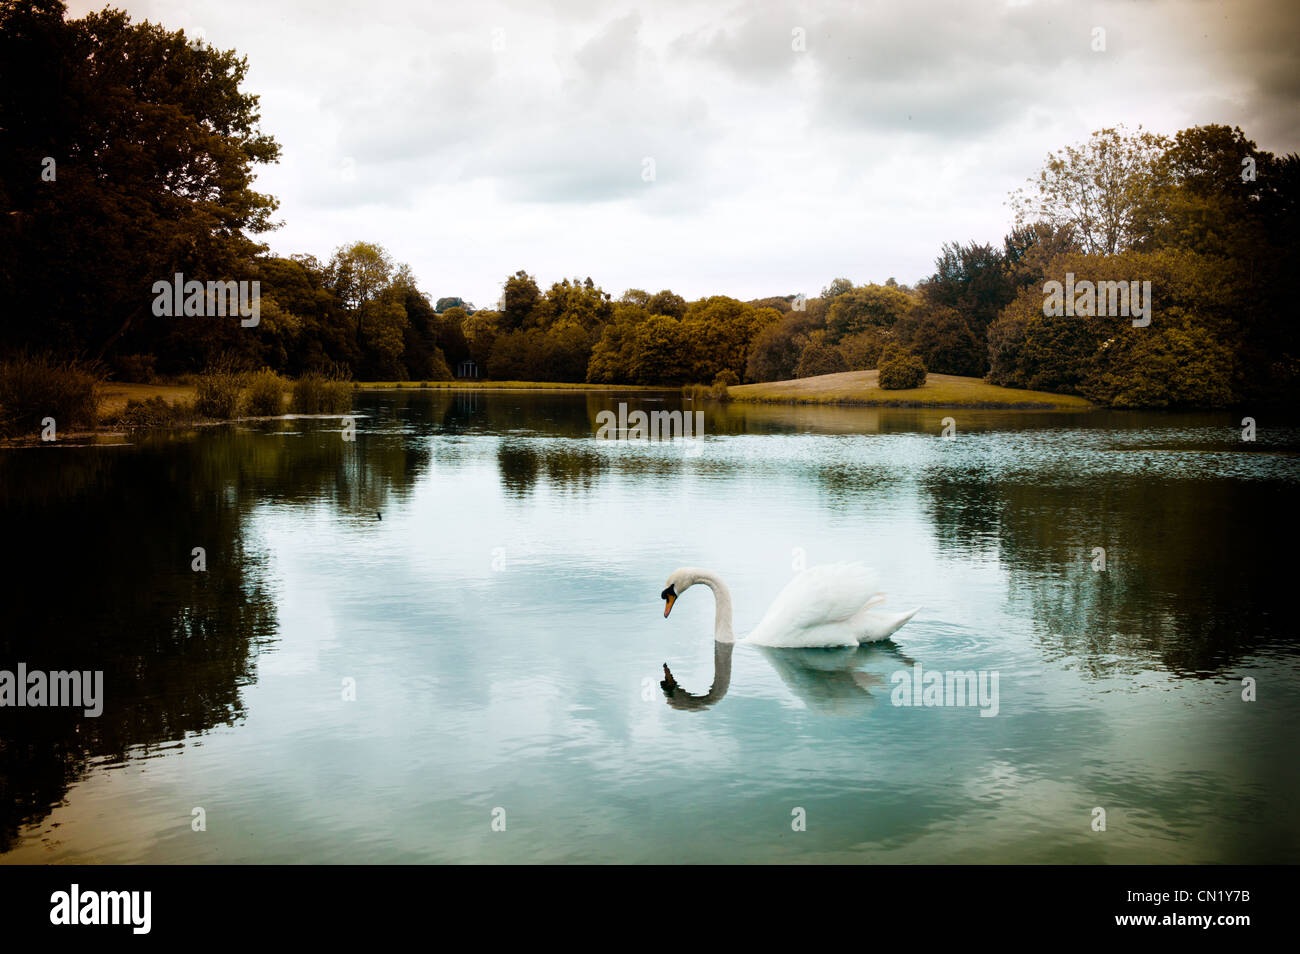 A lake scene surounded by trees Stock Photo